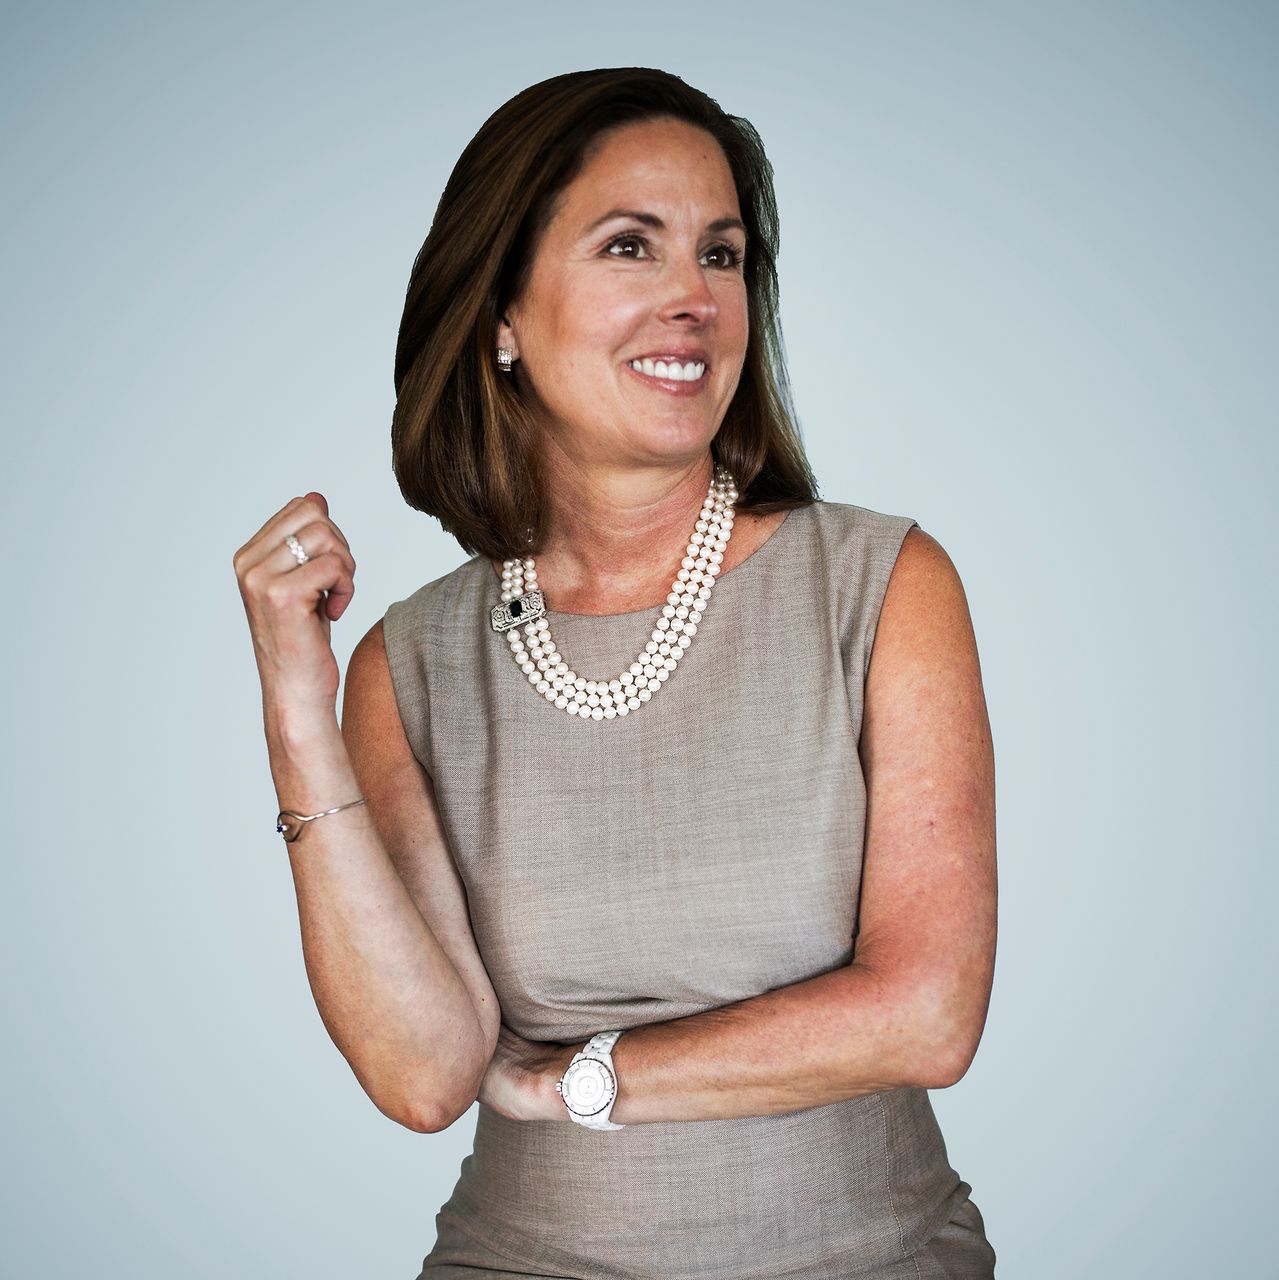 Leslie Lauer is a Managing Director and Private Wealth Advisor with The ESOP Group at UBS.